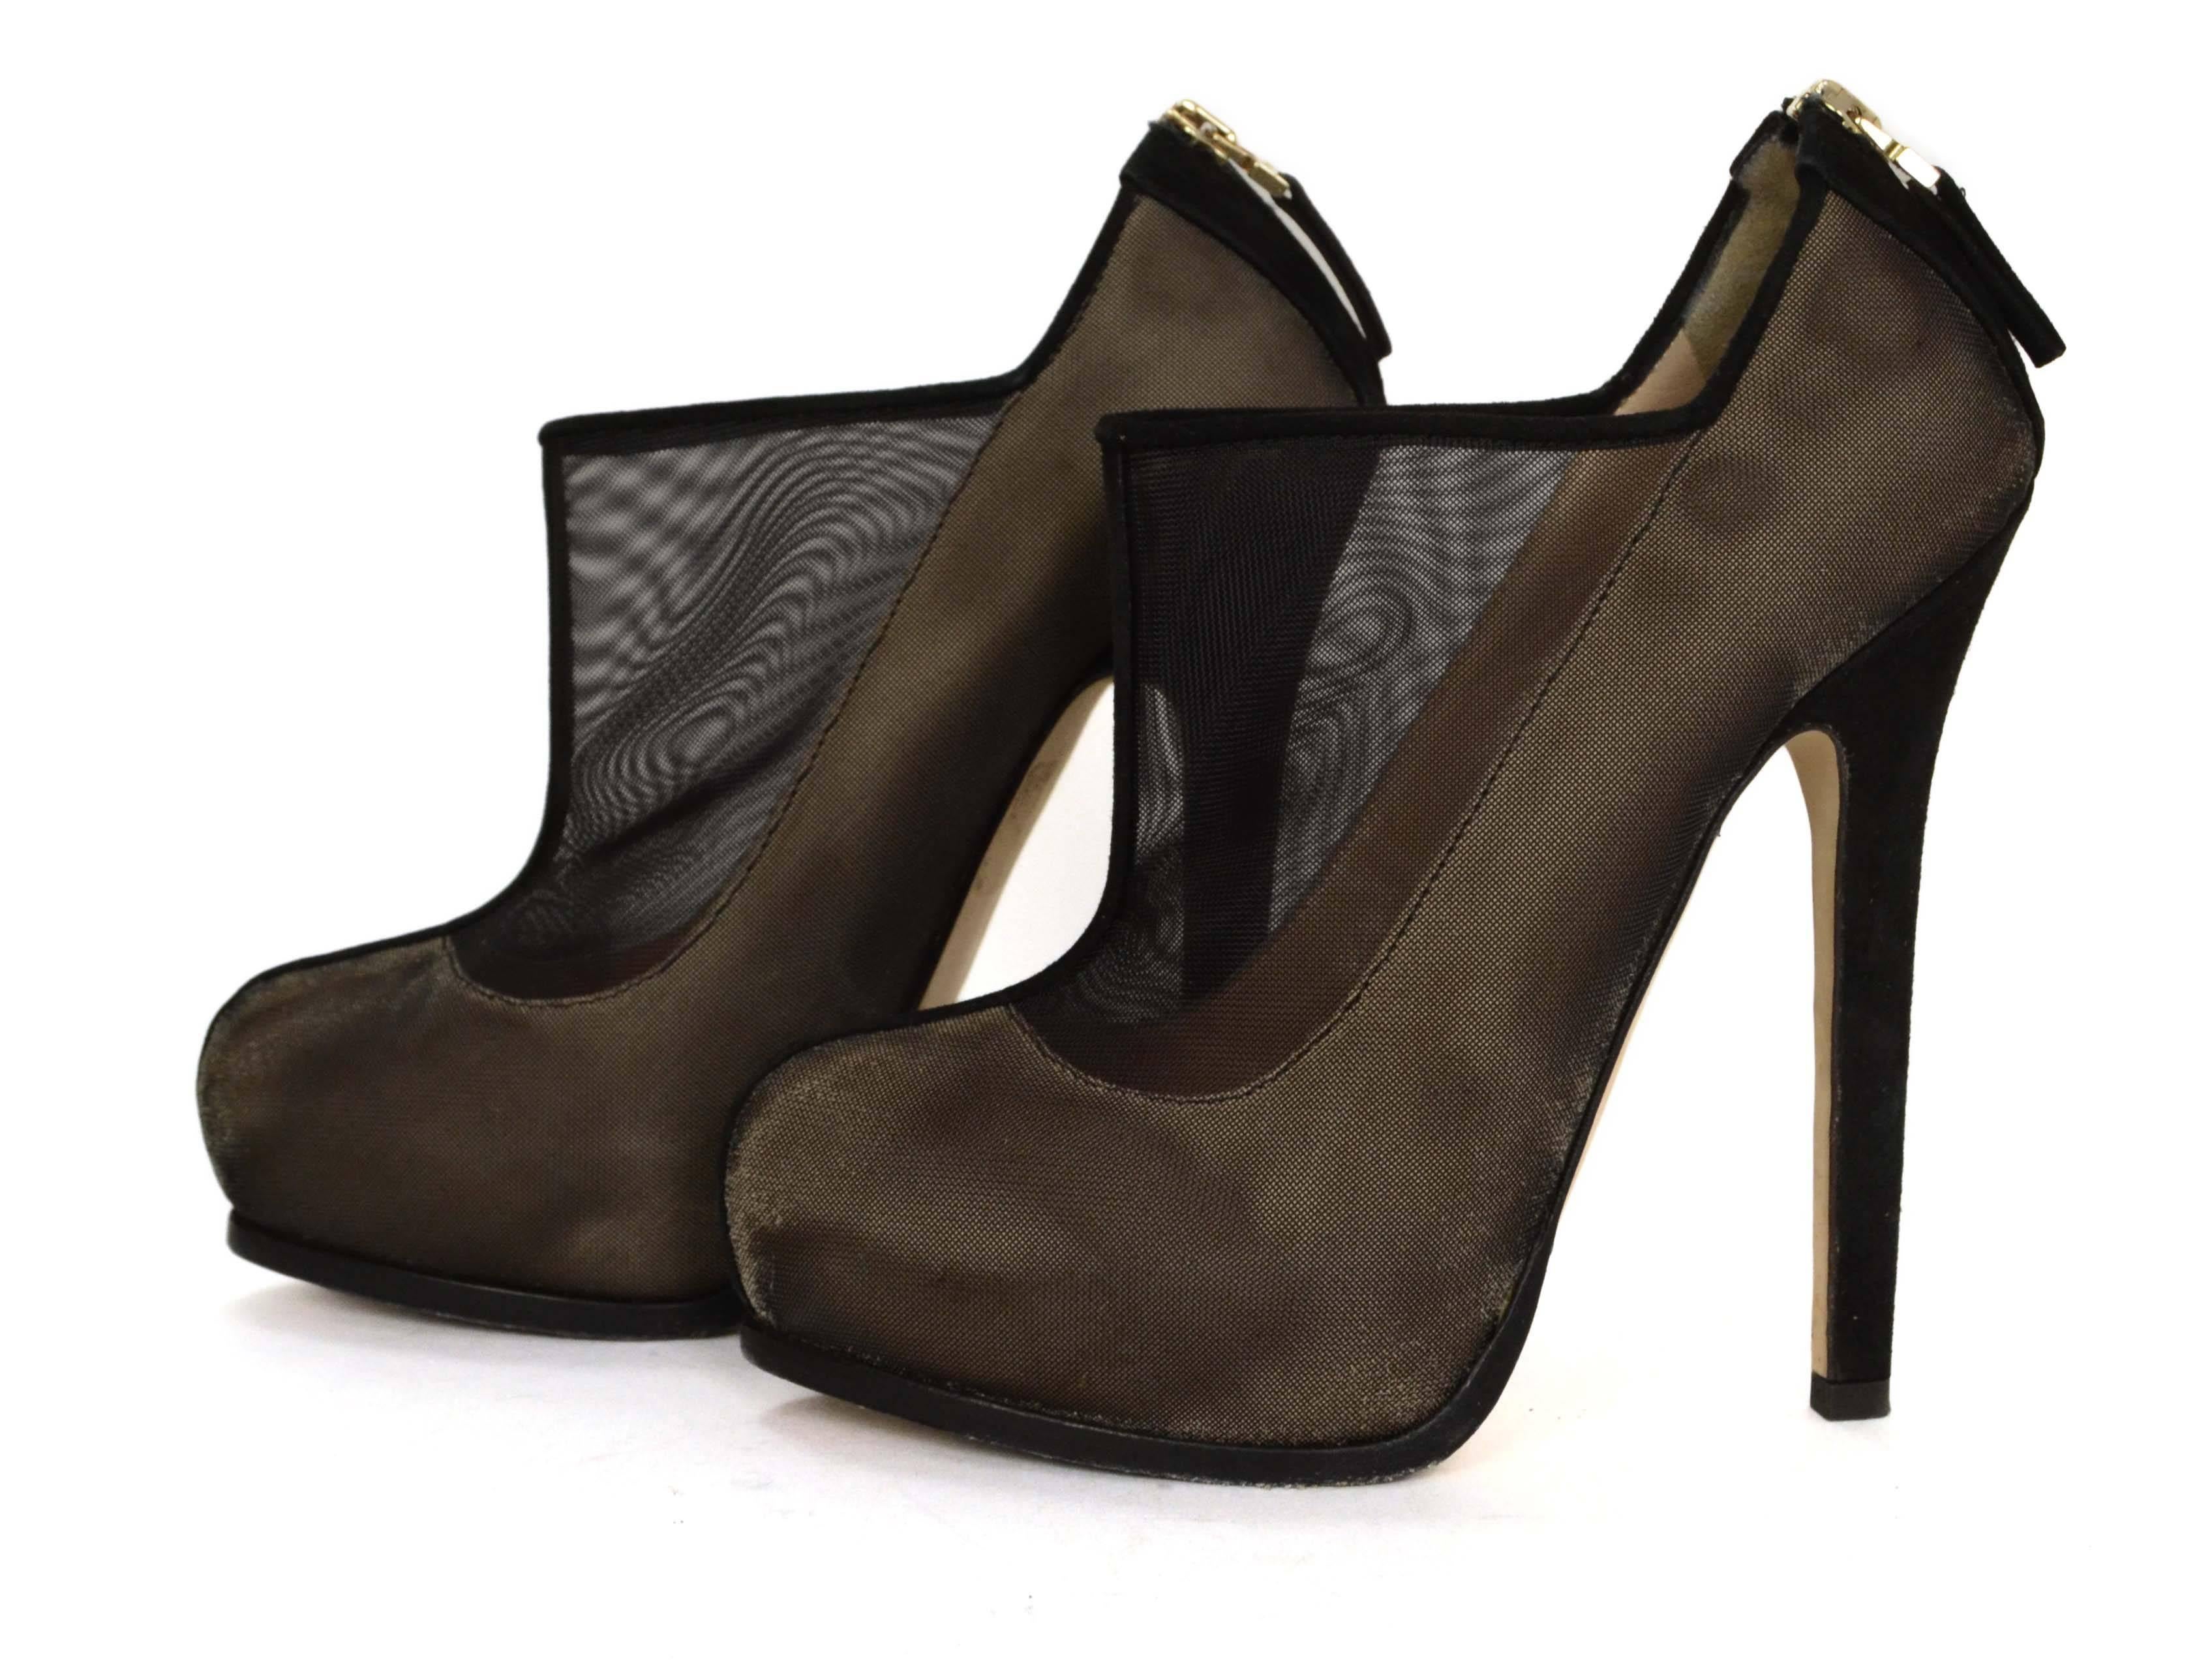 Fendi Black Mesh Platform Pumps 
Features suede wrapped heel and hidden platform
Made In: Italy
Color: Black
Materials: Mesh and suede
Closure/Opening: Back zipper
Sole Stamp: Fendi Made in Italy Vero Cuoio 37
Overall Condition: Excellent